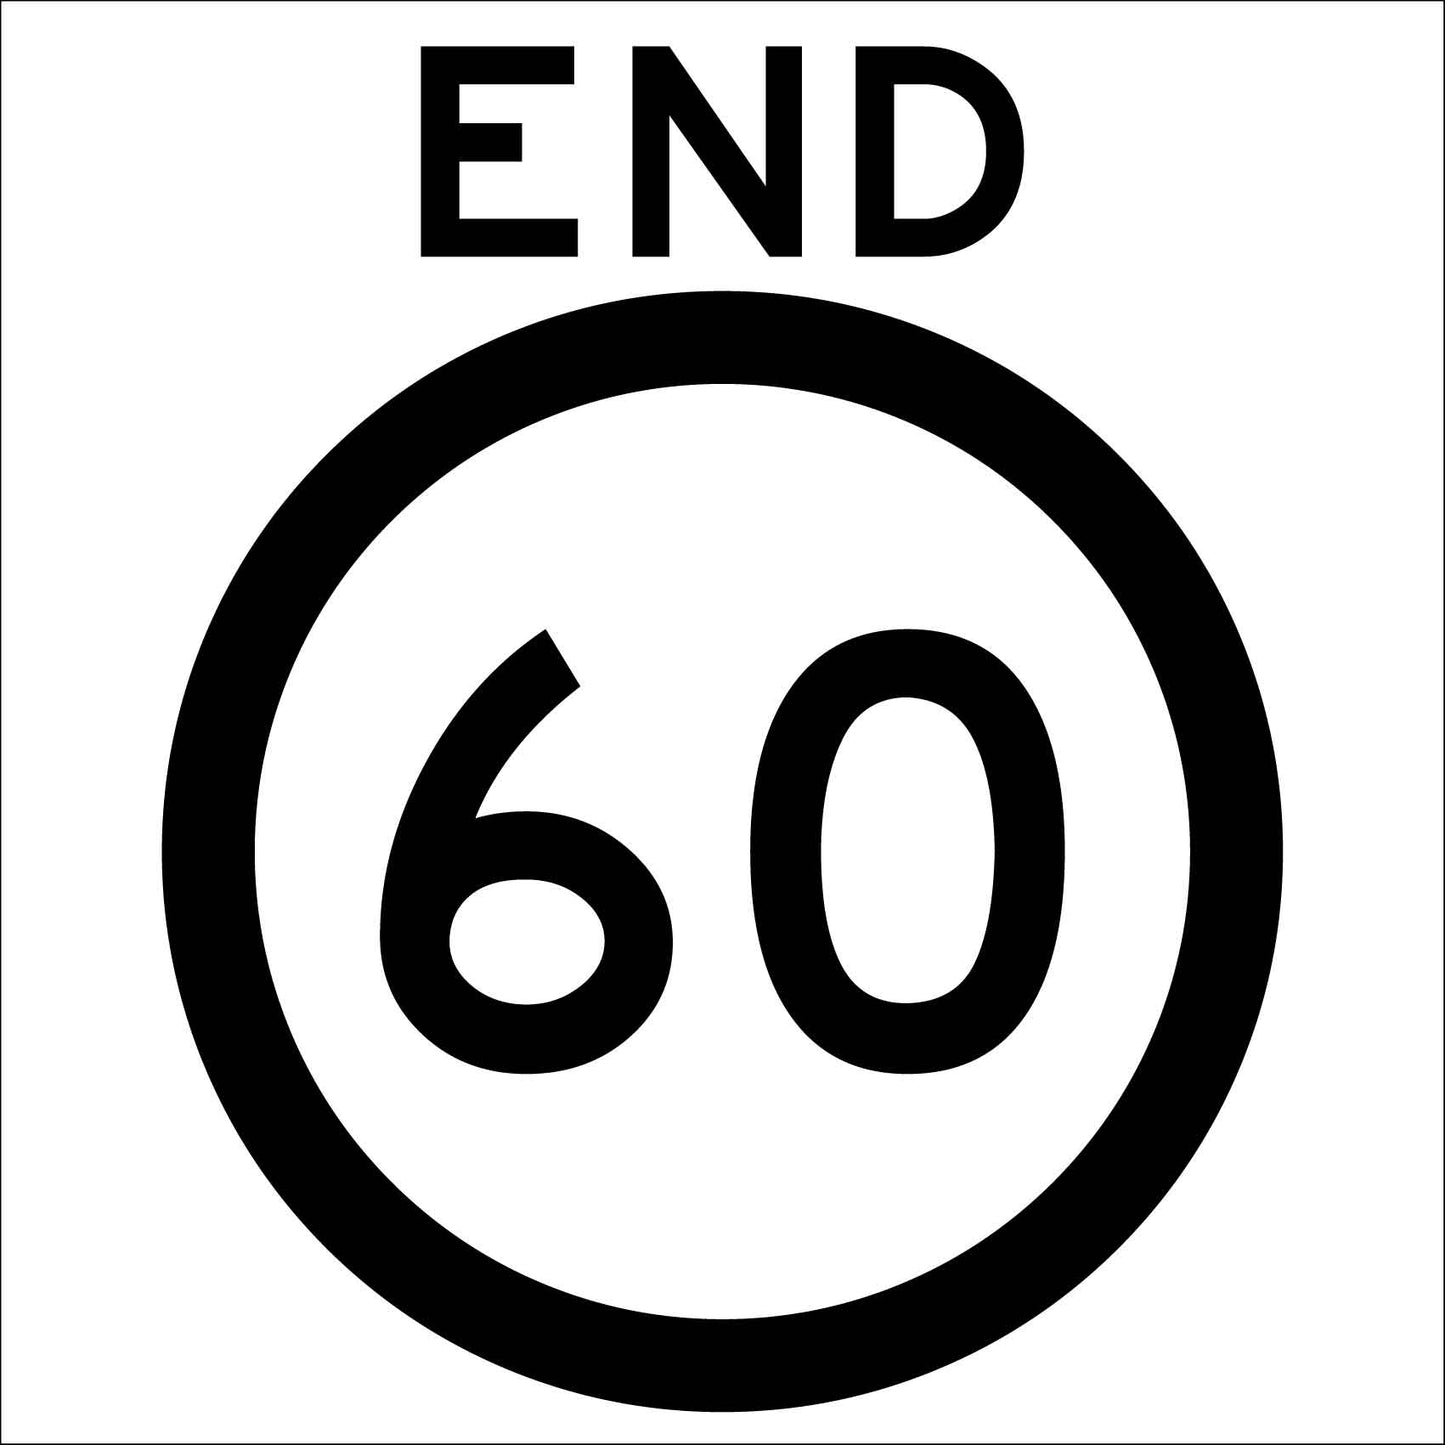 End 60km Multi Message Reflective Traffic Sign